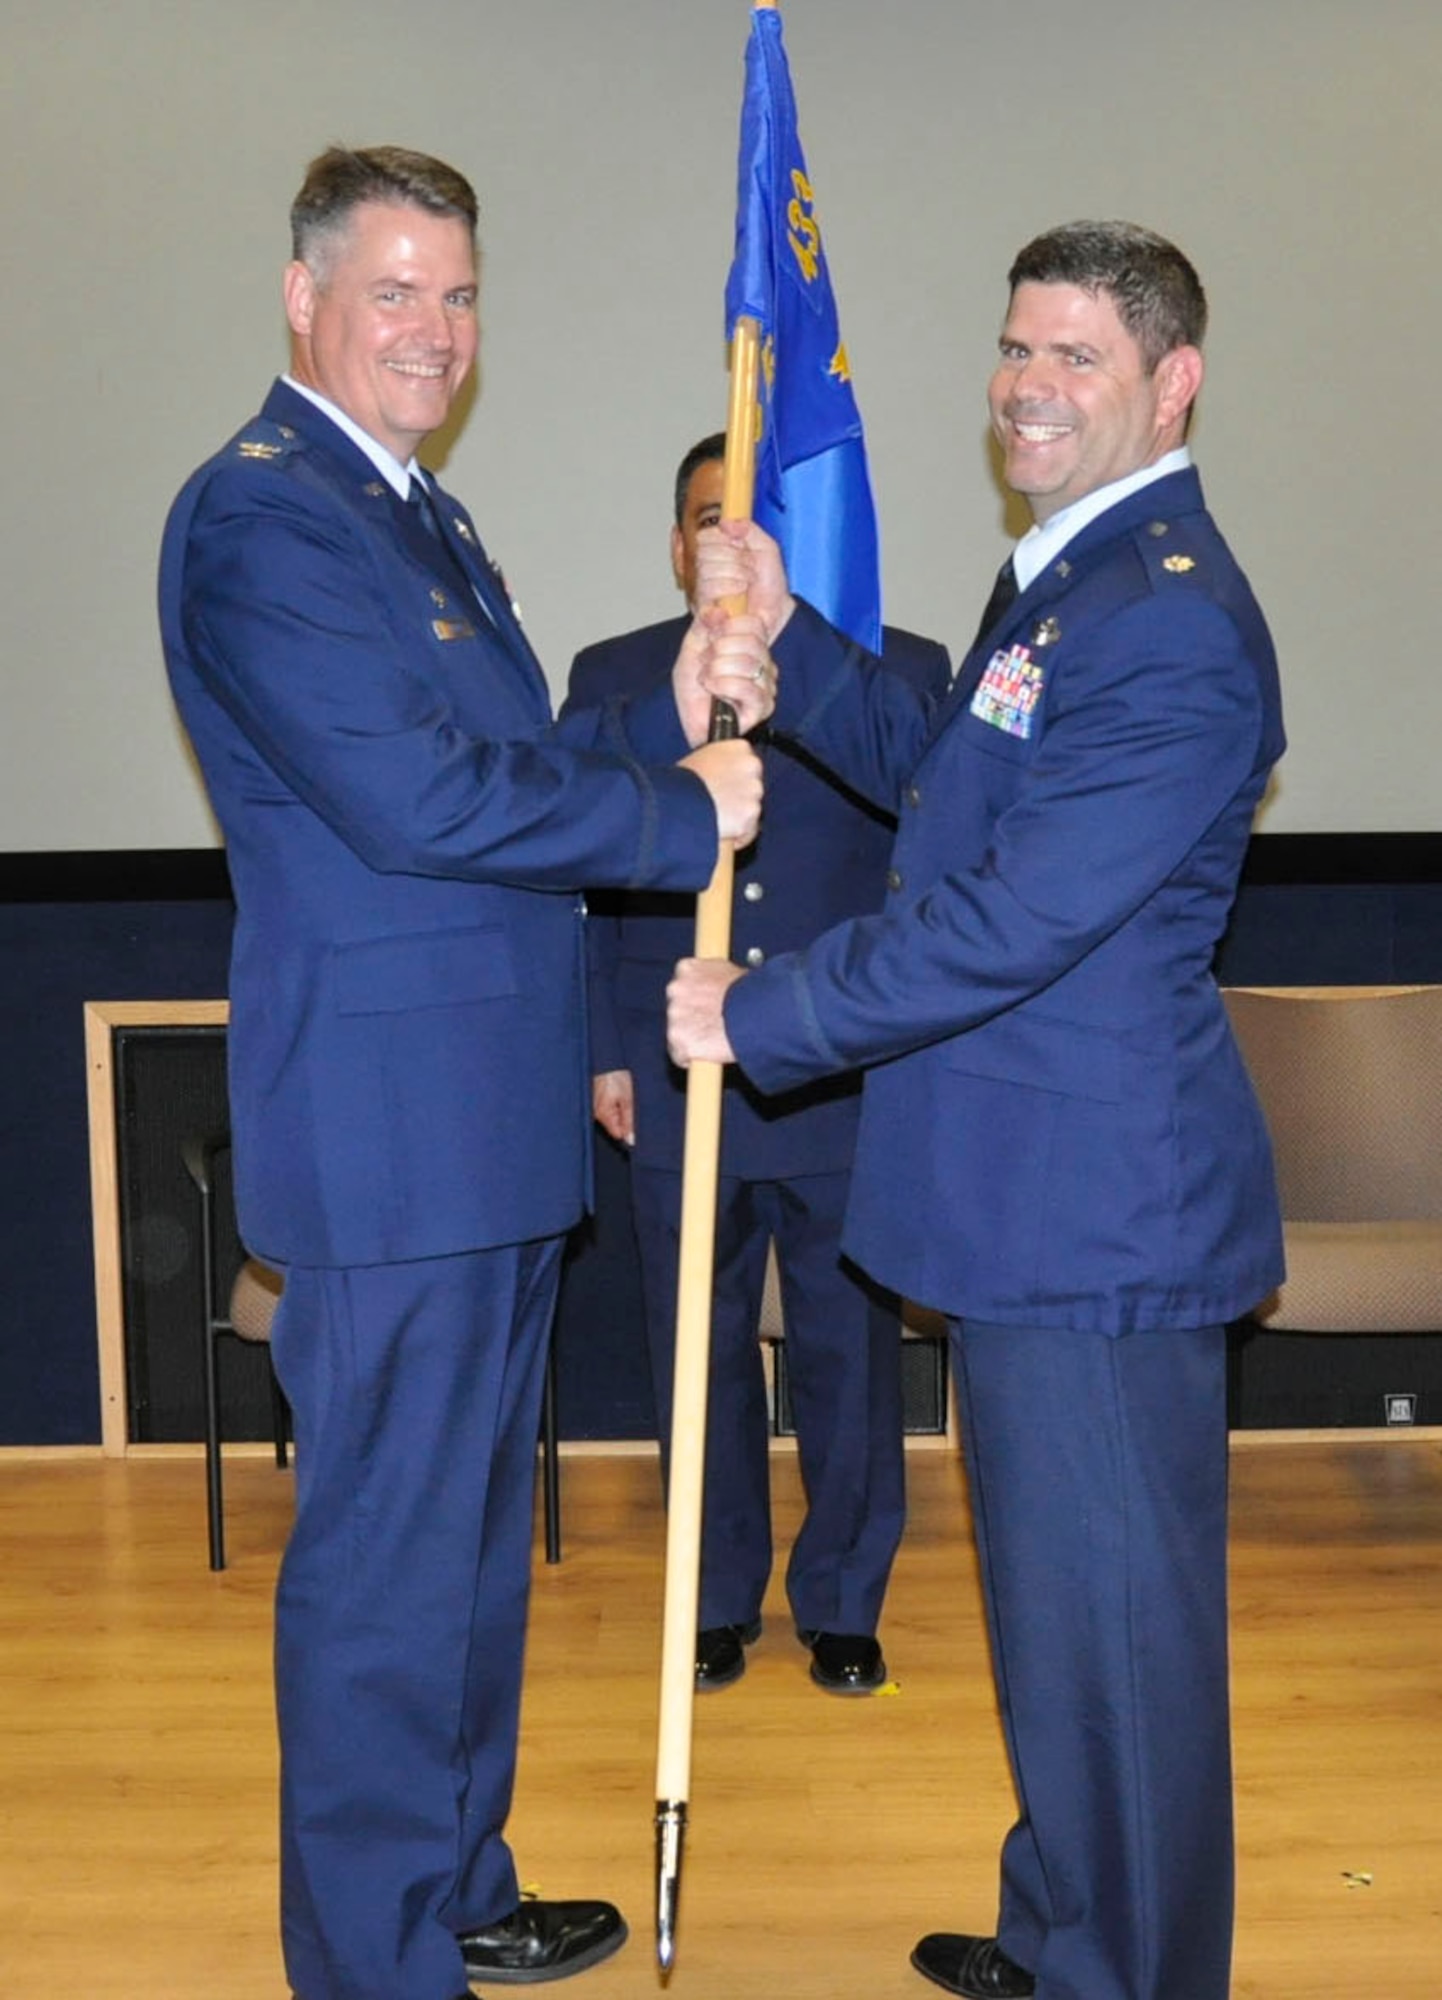 Col. Gregory P. Hayes, 433rd Operations Group commander (left), presents the 68th Airlift Squadron guidon to new commander, Lt. Col. Daniel King, during the 68th AS Change of Command Ceremony at Joint Base San Antonio-Lackland, Texas, Oct. 15, 2016. (U.S. Air Force photo by Senior Airman Bryan Swink) 